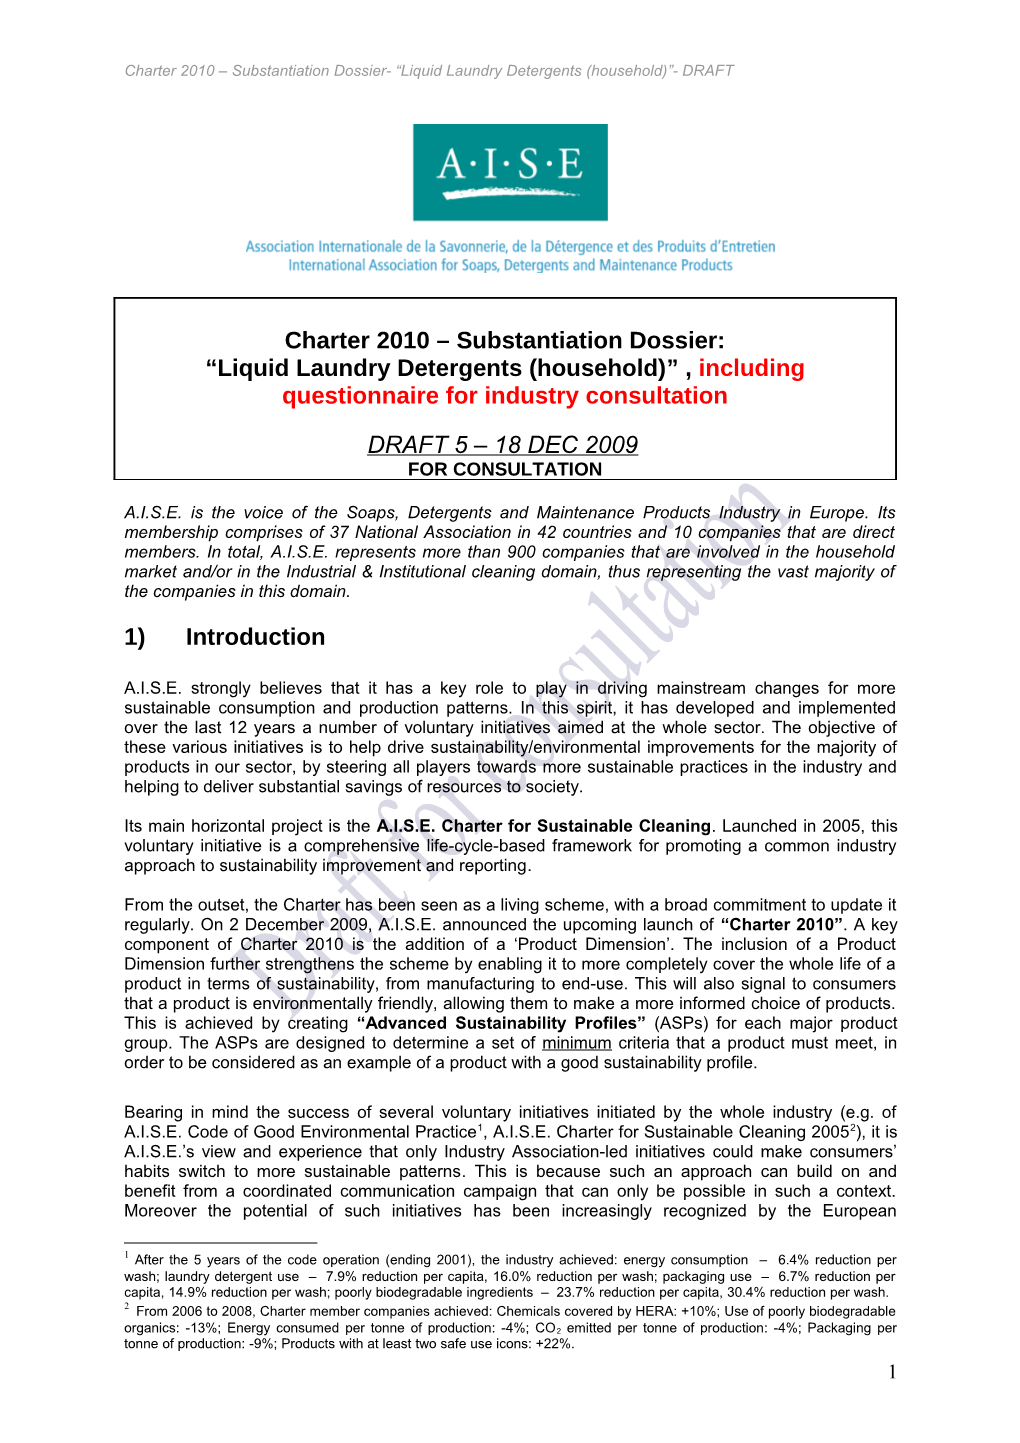 Charter 2010 Substantiation Dossier- Liquid Laundry Detergents (Household) - DRAFT